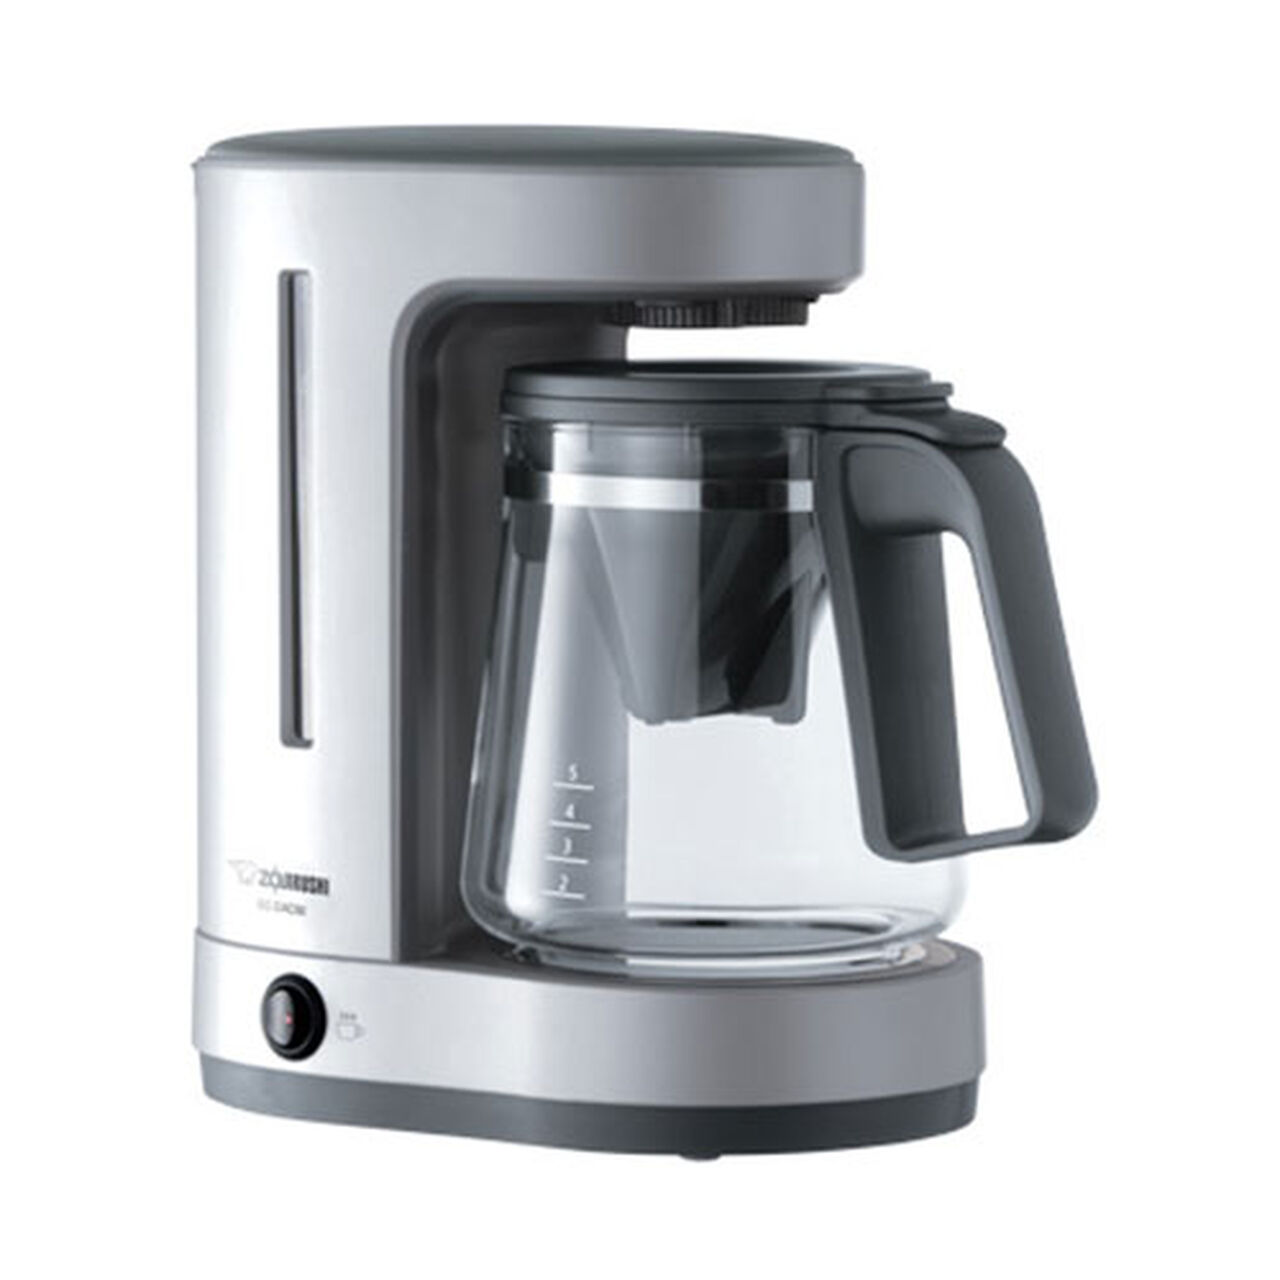 Zojirushi Zutto Coffee Maker 5-cup #EC-DAC50, , large image number 0